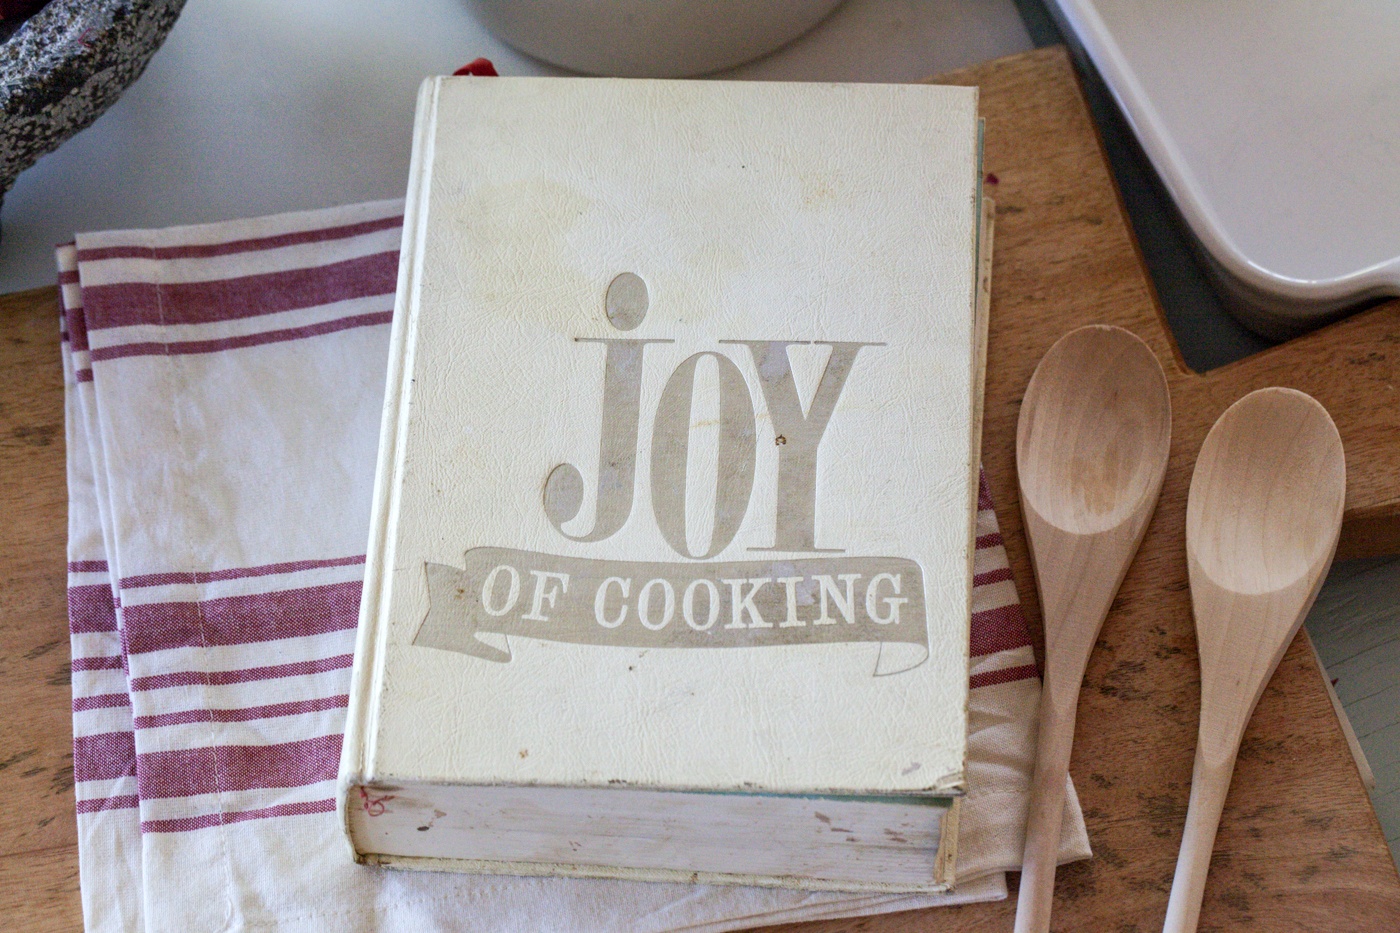 Vintage edition of Joy of Cooking on a kitchen table with wooden spoons